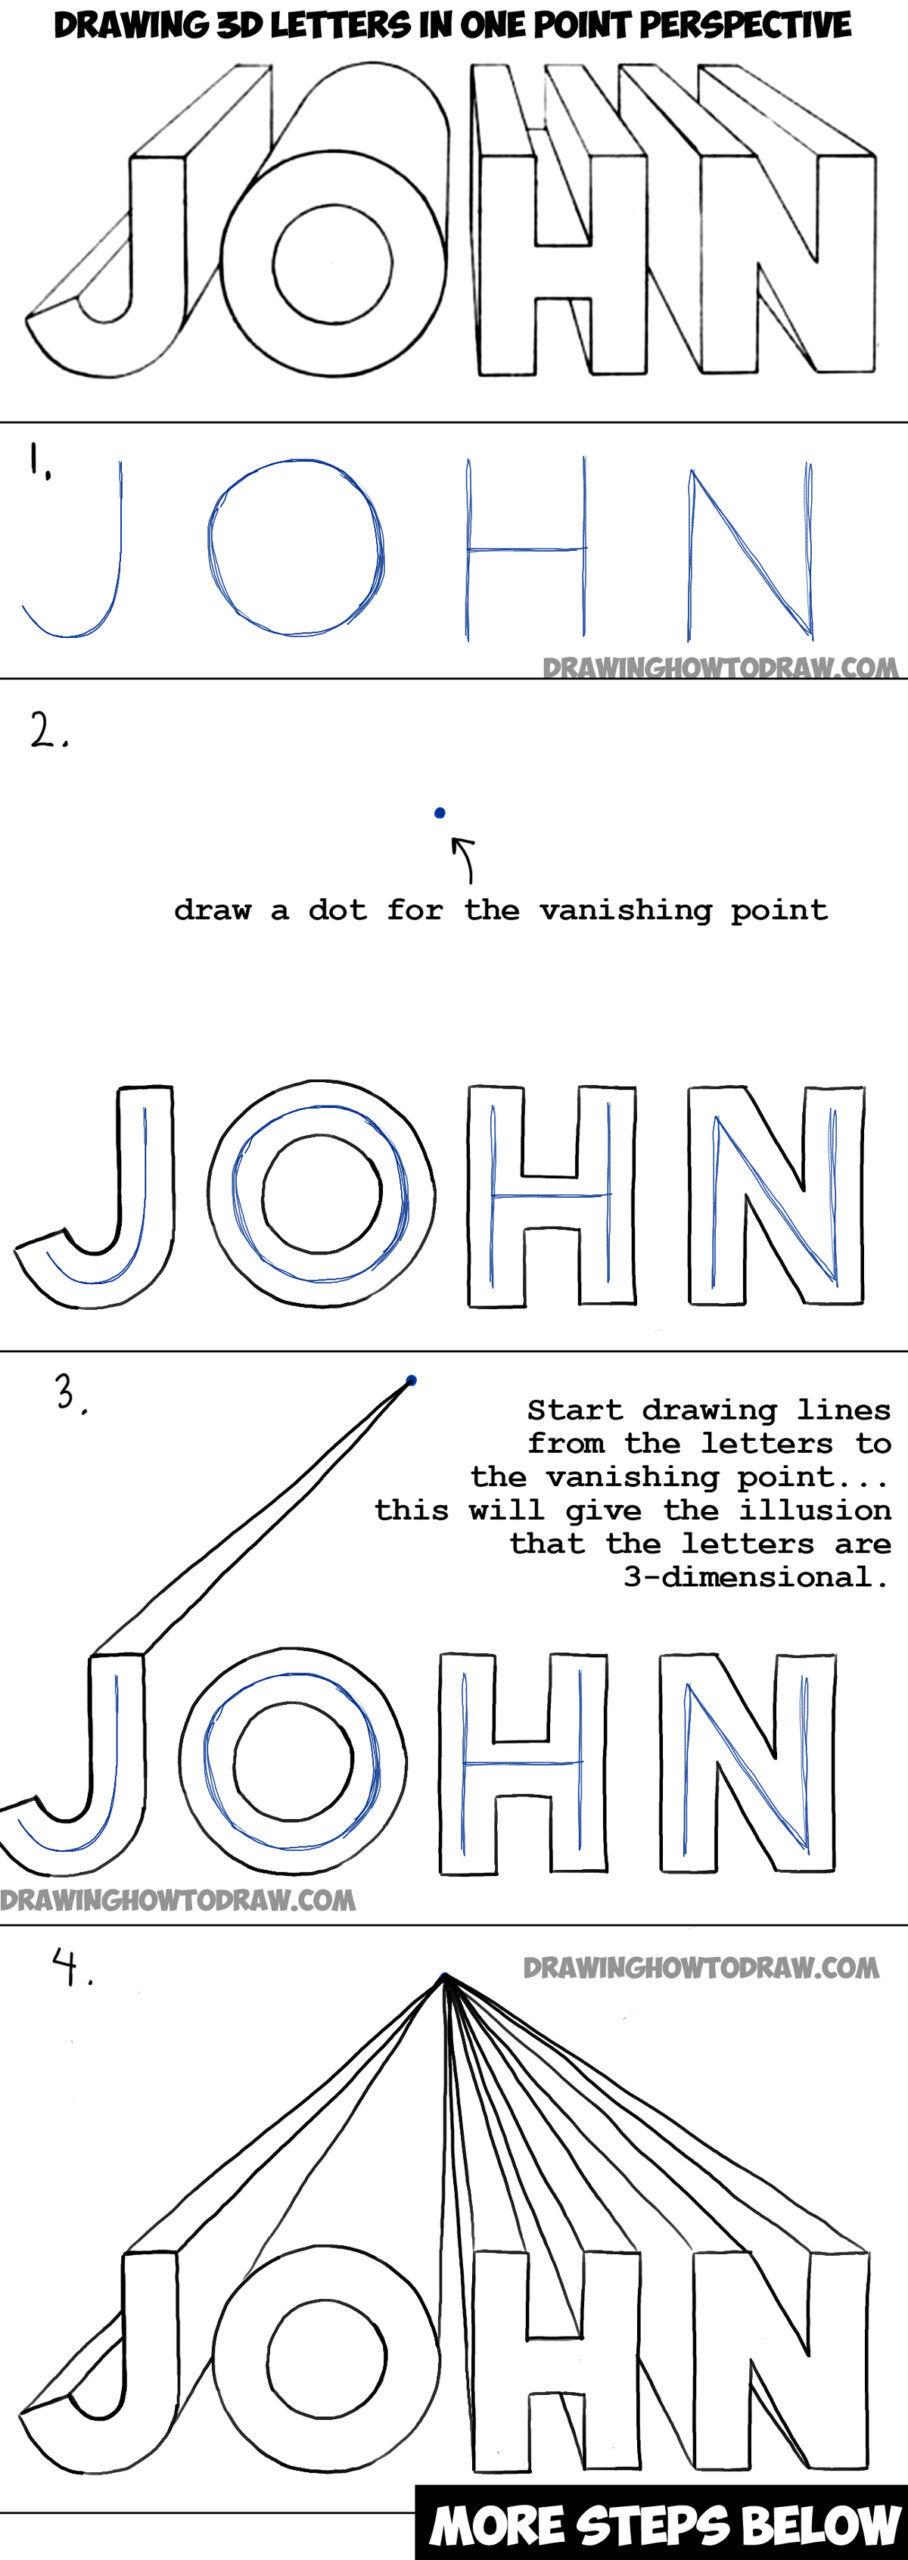 Steps to draw 3-D letters that spell John are shown.